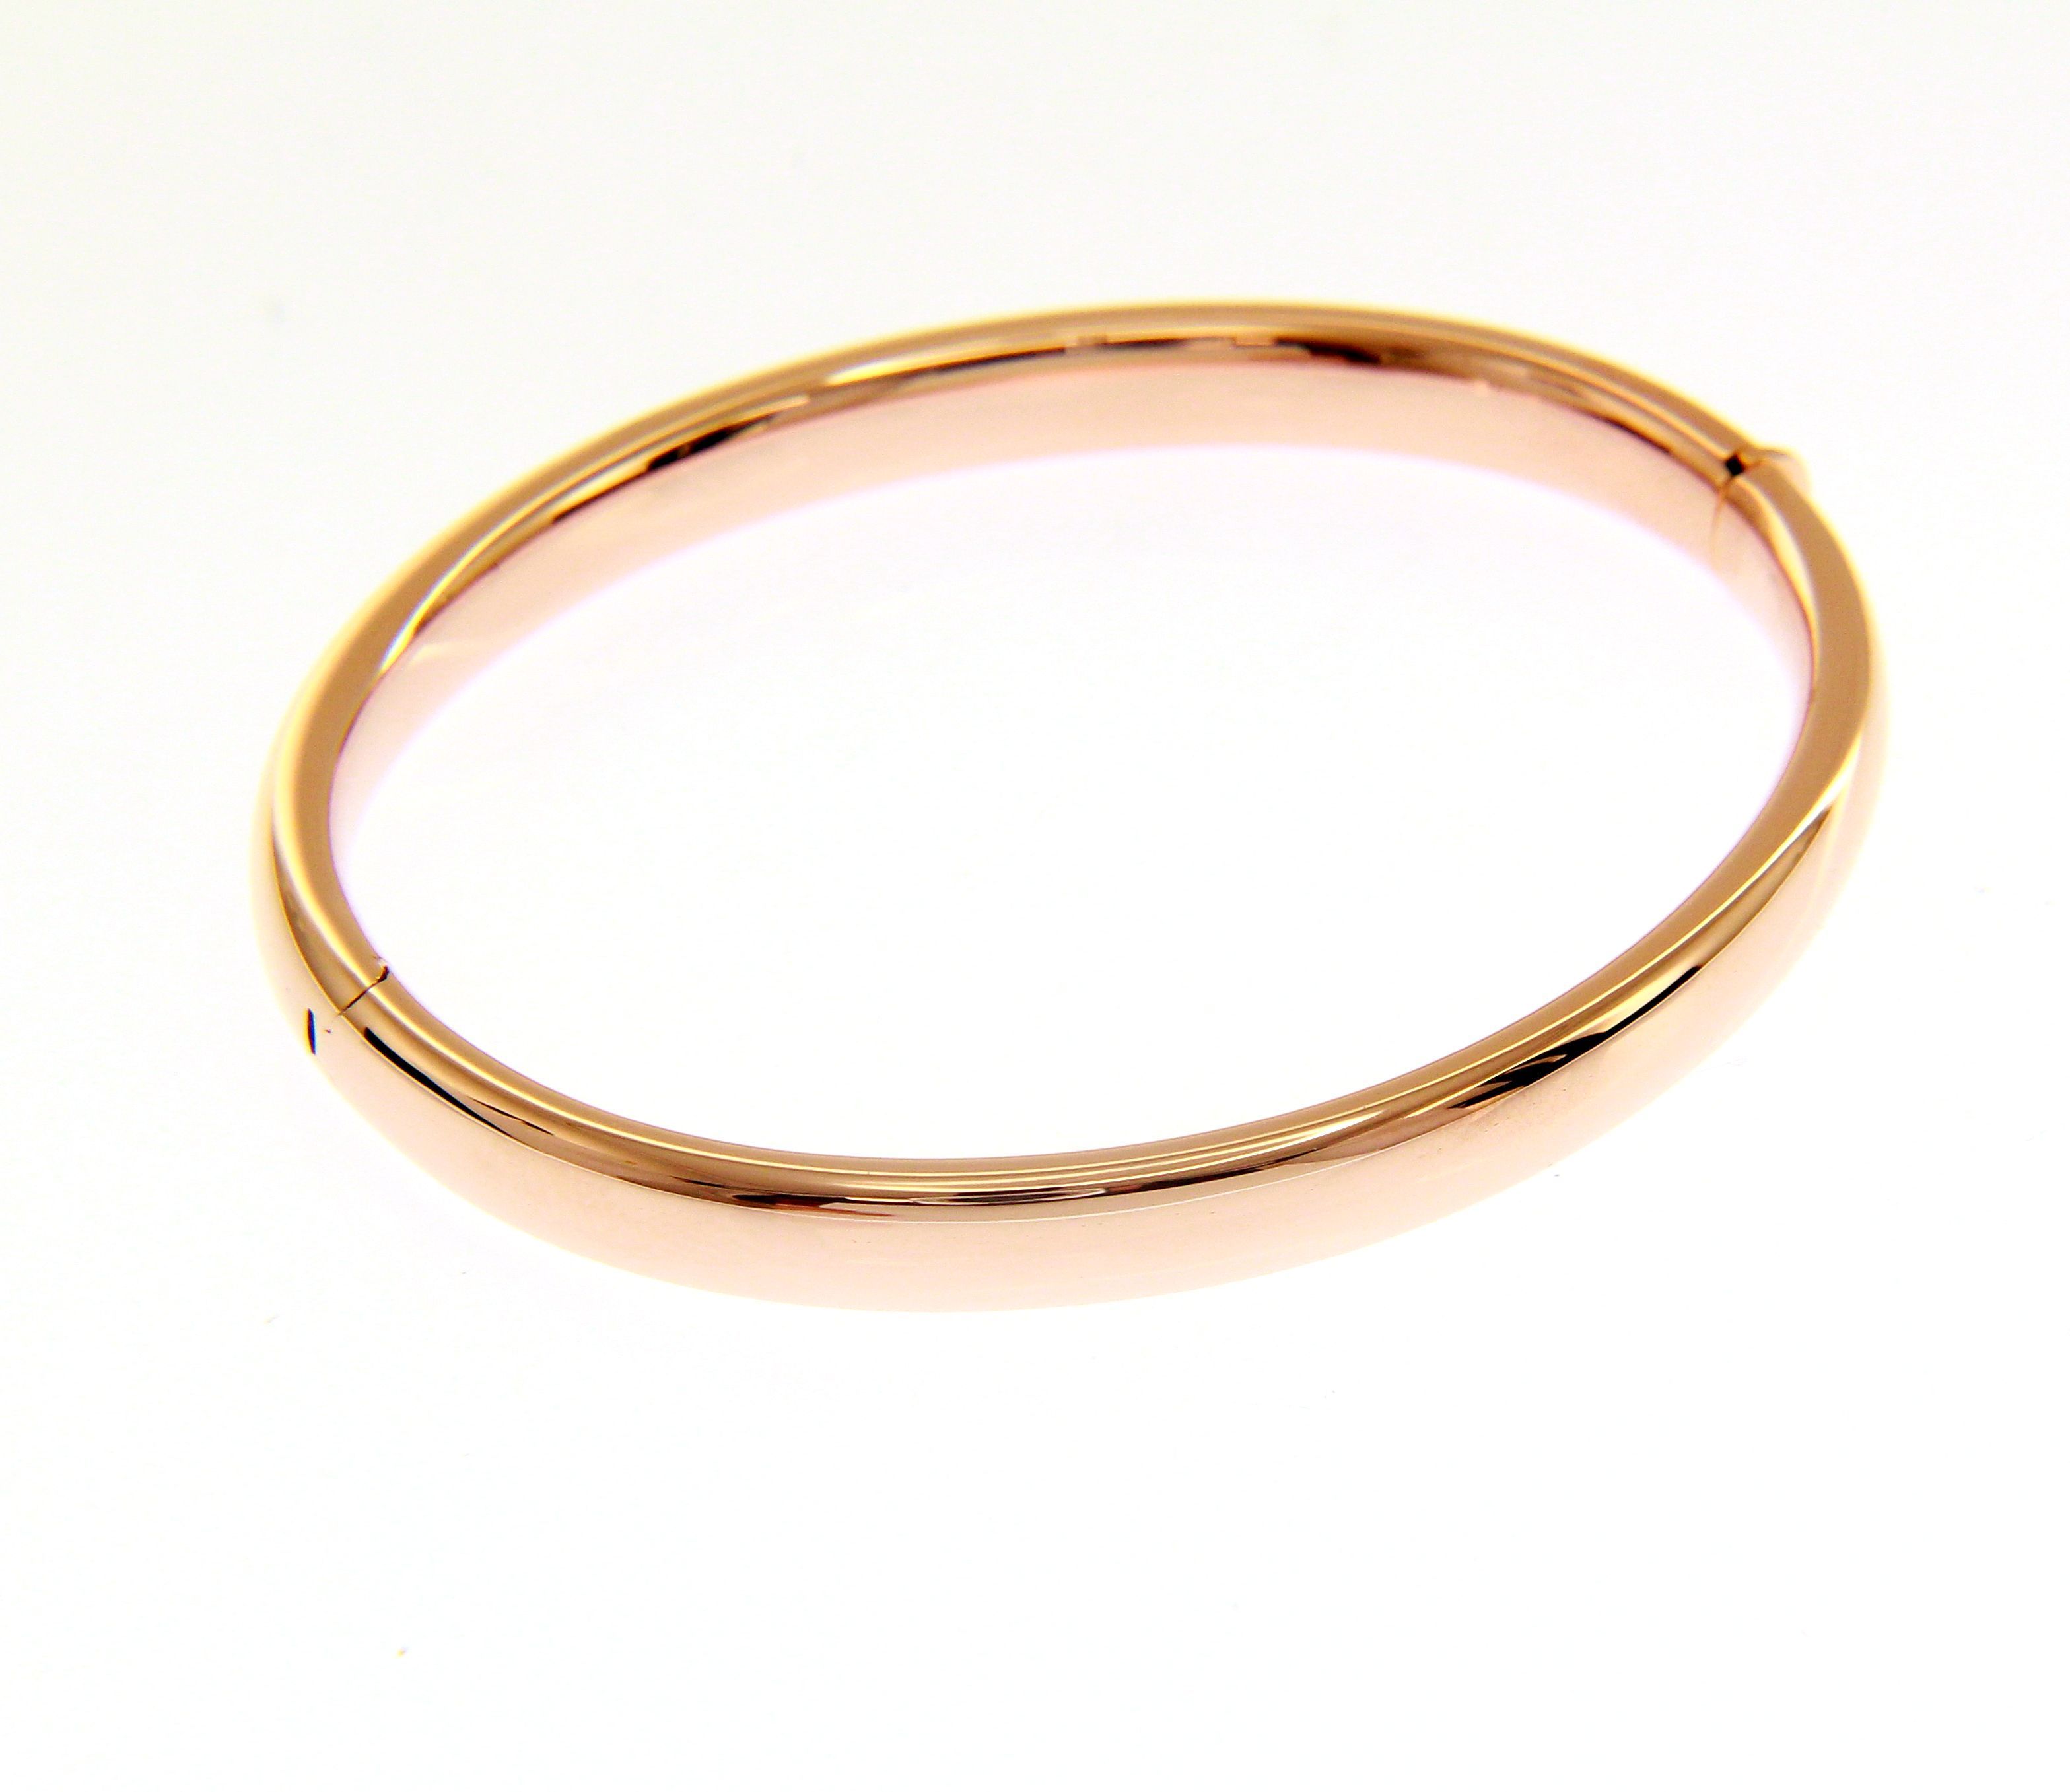 Rose gold oval bracelet with clasp k14(code S205086)